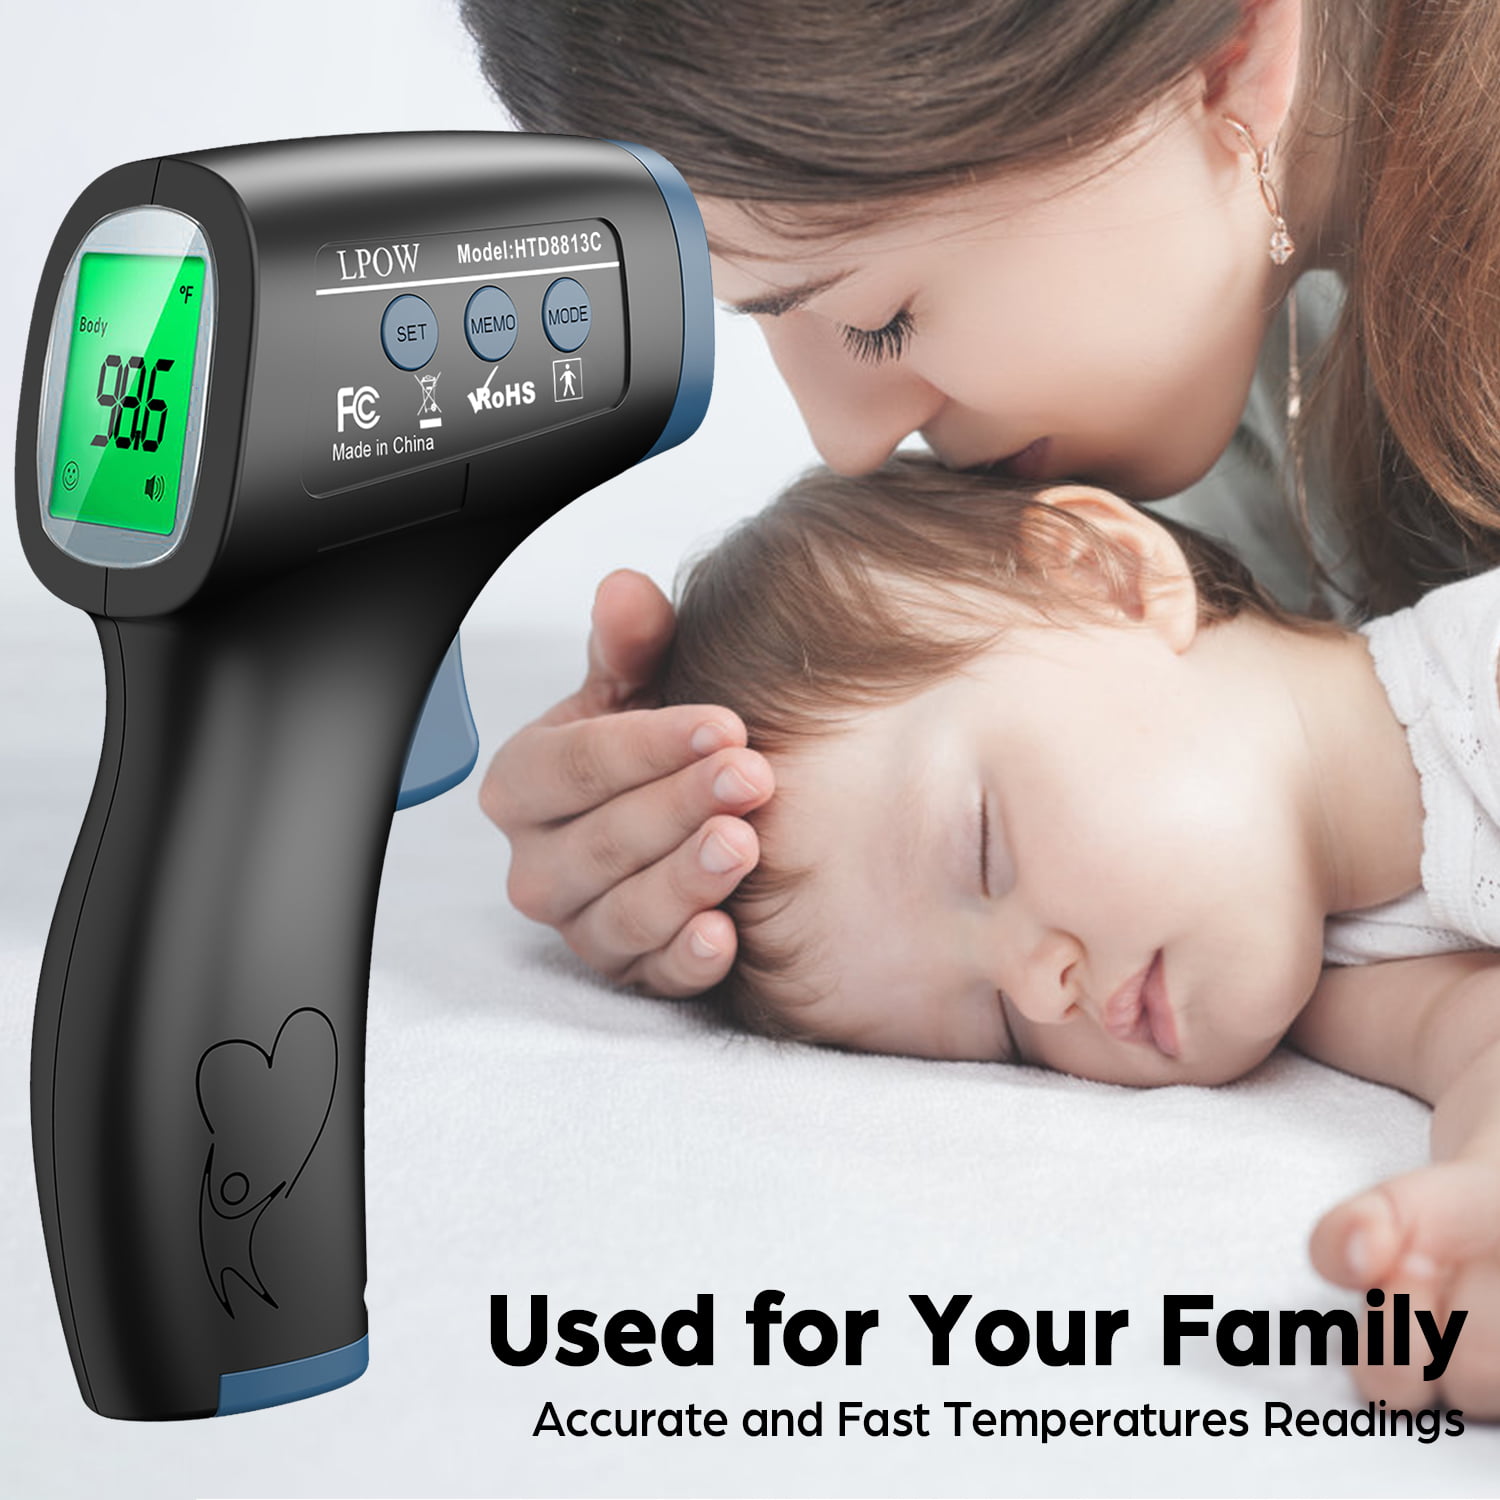 LPOW Non-Contact Infrared Thermometer with Fast Reading